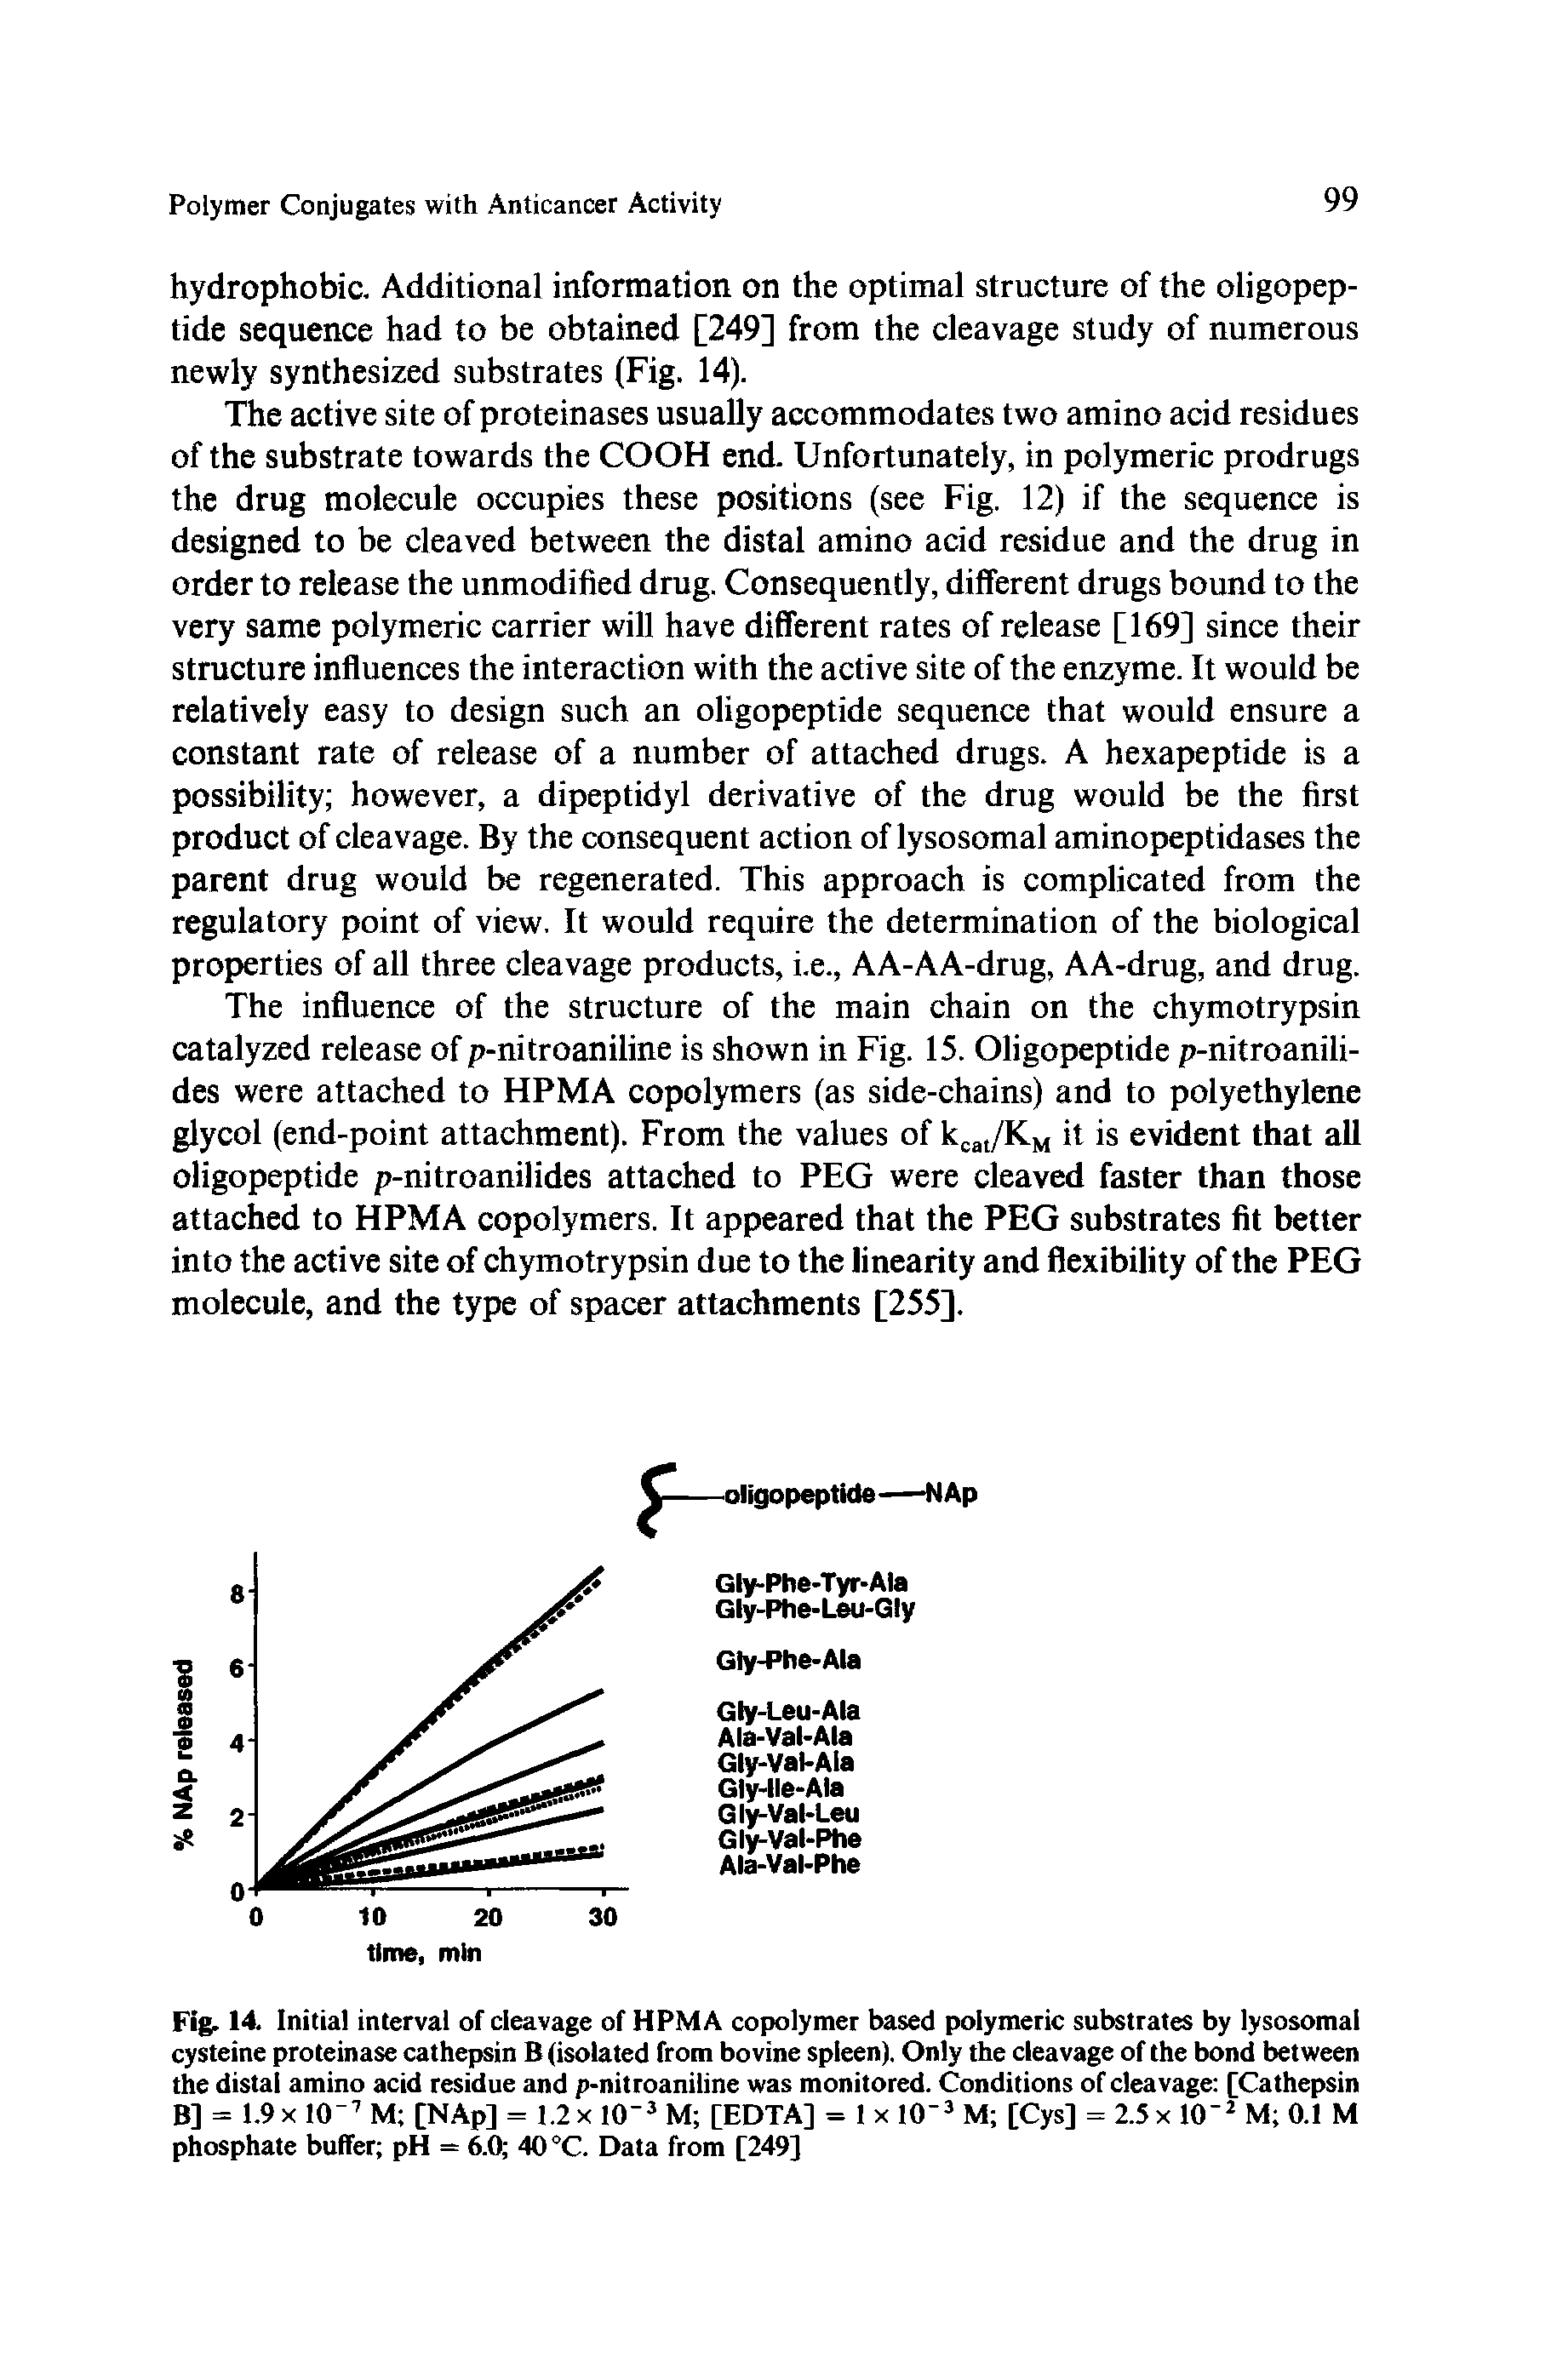 Fig. 14. Initial interval of cleavage of HPMA copolymer based polymeric substrates by lysosomal cysteine proteinase cathepsin B (isolated from bovine spleen). Only the cleavage of the bond between the distal amino acid residue and p-nitroaniline was monitored. Conditions of cleavage [Cathepsin B] = 1.9 x 10 7 M [NAp] = 1.2 x 1(T3 M [EDTA] = 1 x 10 3 M [Cys] = 2.5 x 10 2 M 0.1 M phosphate buffer pH = 6.0 40 °C. Data from [249]...